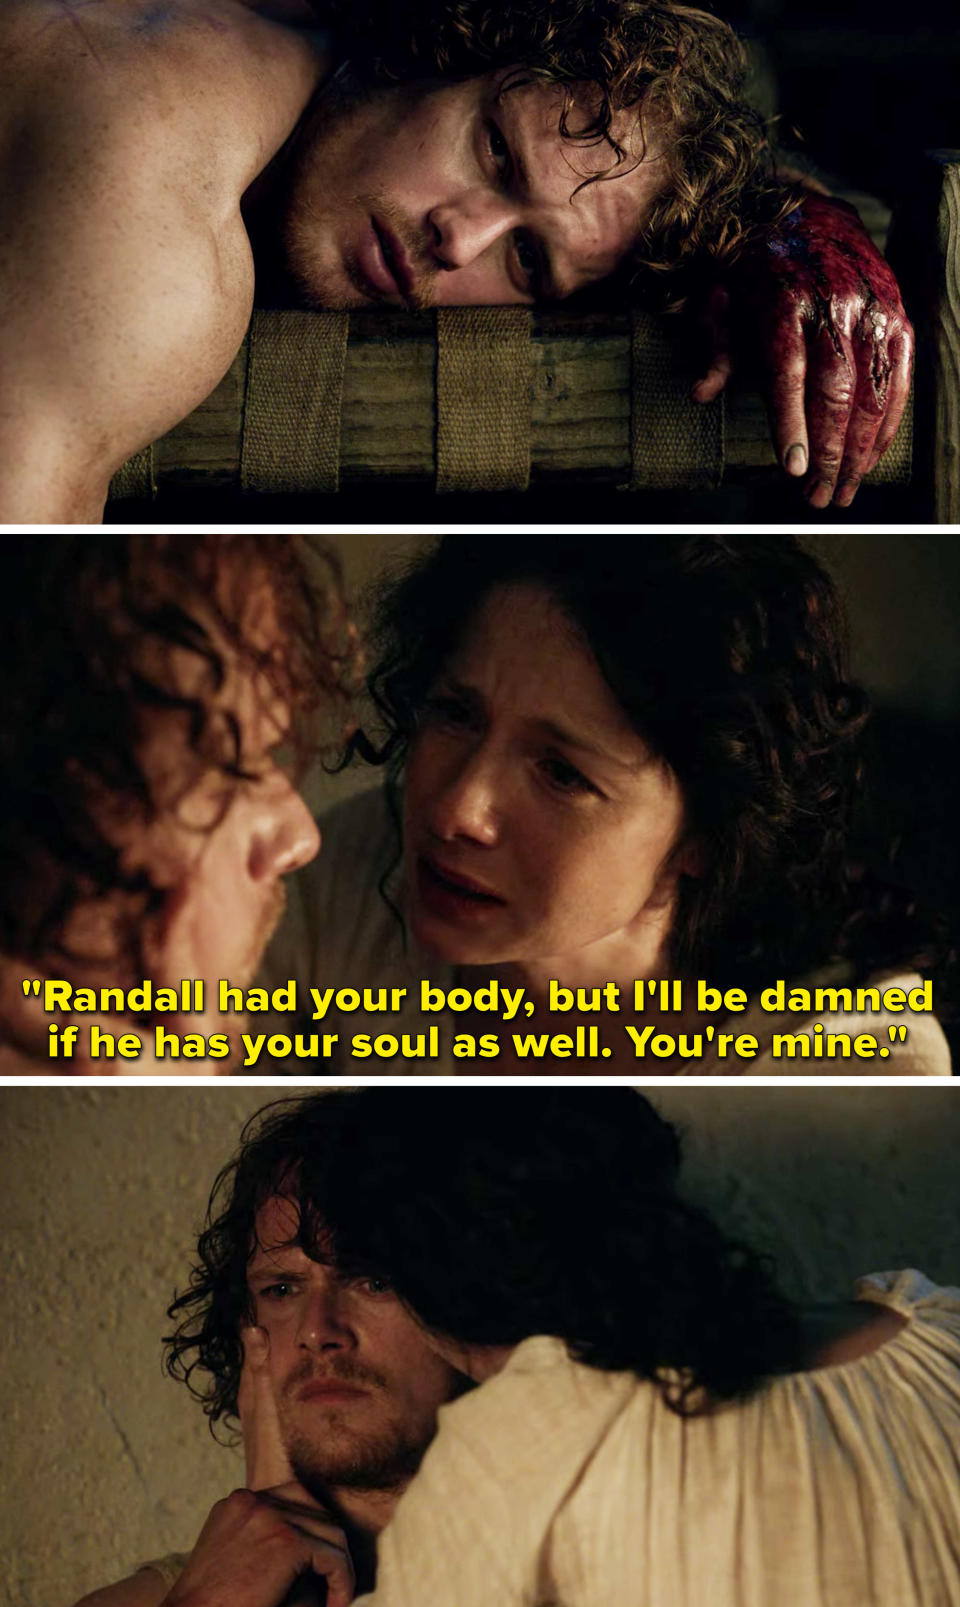 Claire telling Jamie "Randall had your body, but I'll be damned if he has your soul as well. You're mine"